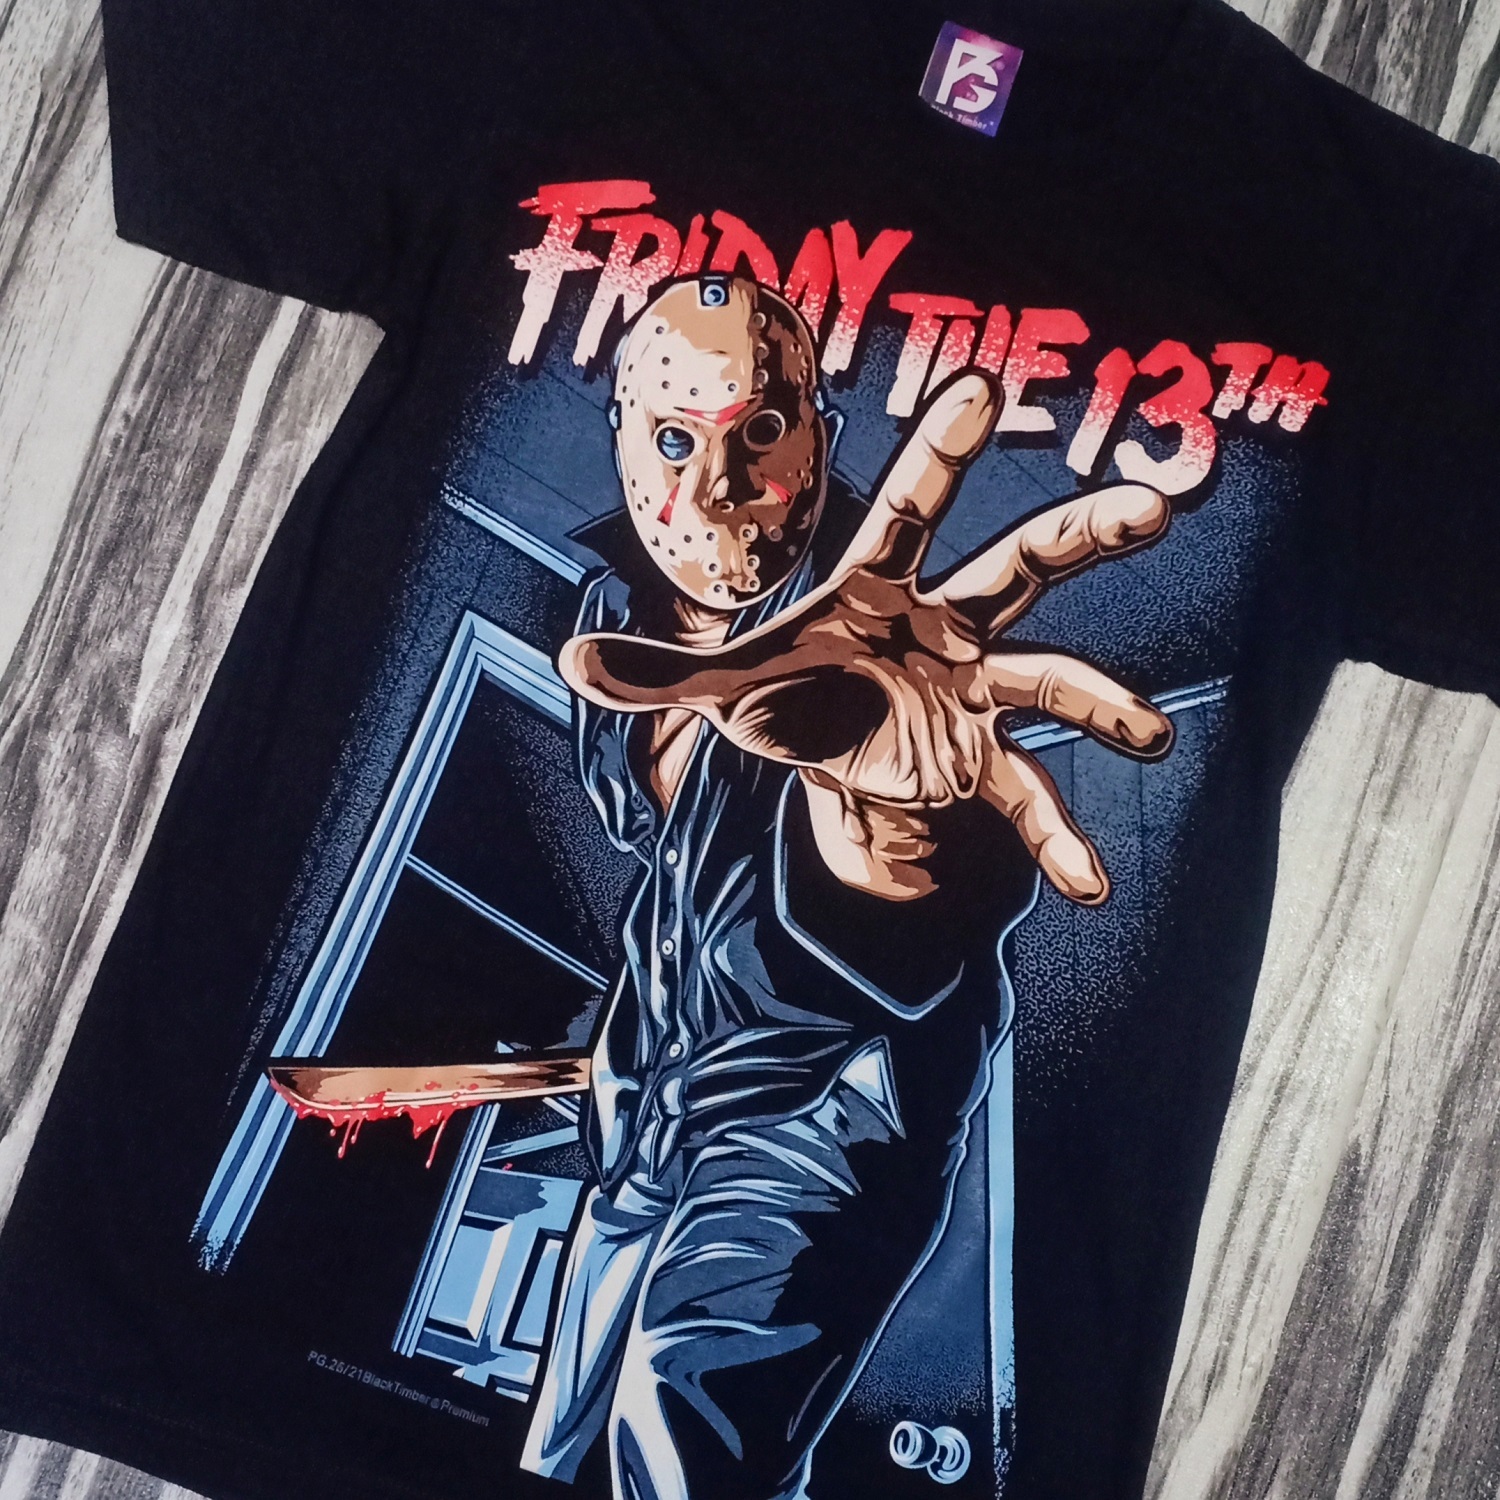 PG26 JASON VOORHEES FRIDAY 13TH SCARRY HORROR FANART COLLECTION ORIGINAL  PREMIUM GRADE BLACK TIMBER COTTON T-SHIRT – PREMIUM GRADE BLACK TIMBER NEW  TYPE SYSTEM MOAI SPEED HIGH QUALITY SILK SCREEN COLLECTABLE T-SHIRT